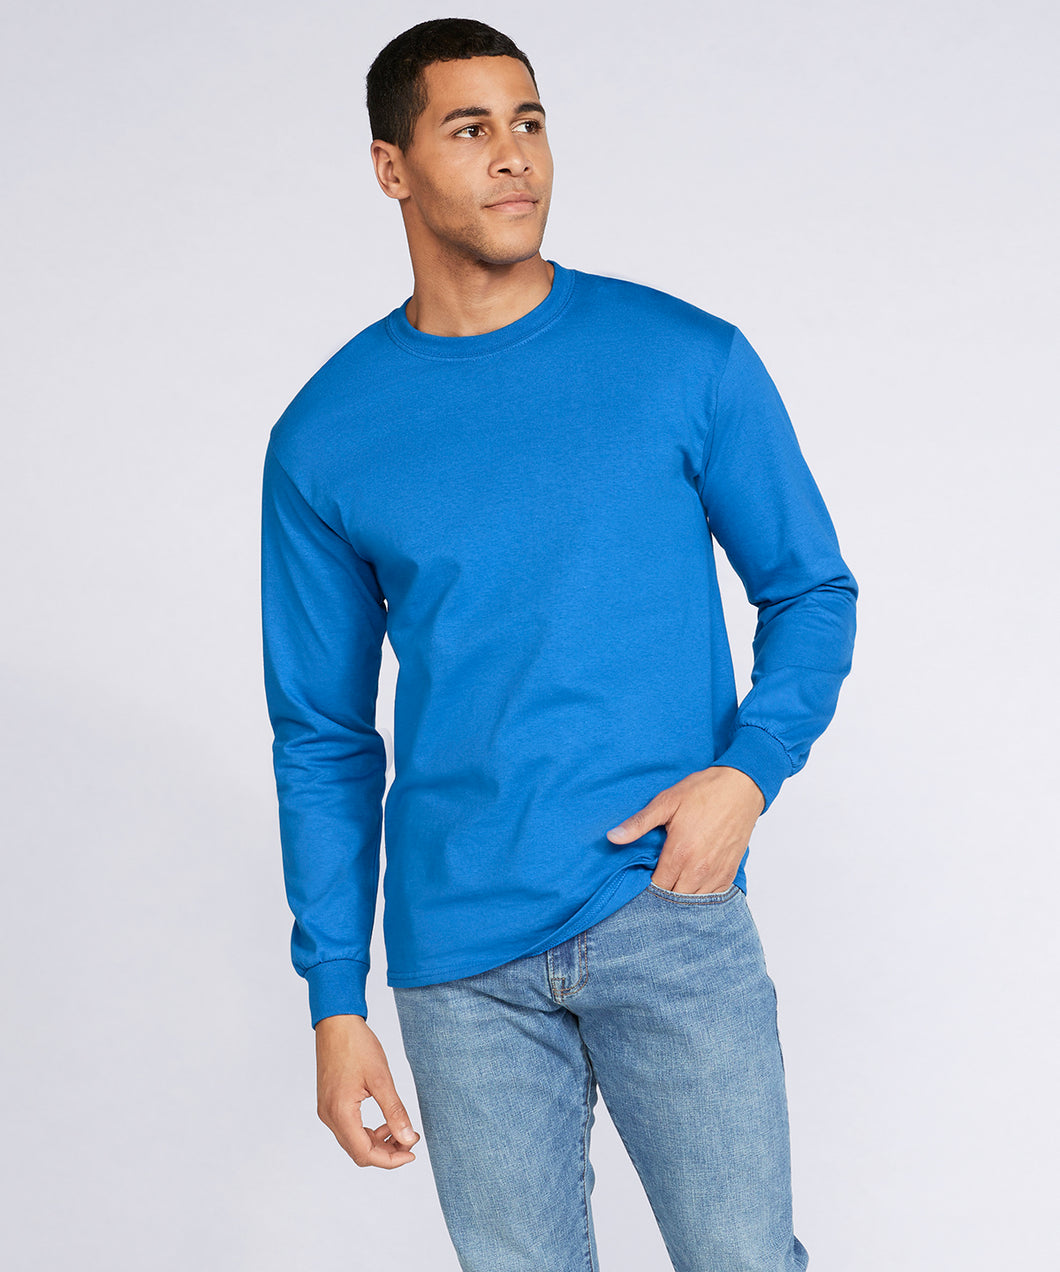 Embroidered - Adult Cotton Long Sleeve ringspun t-shirt